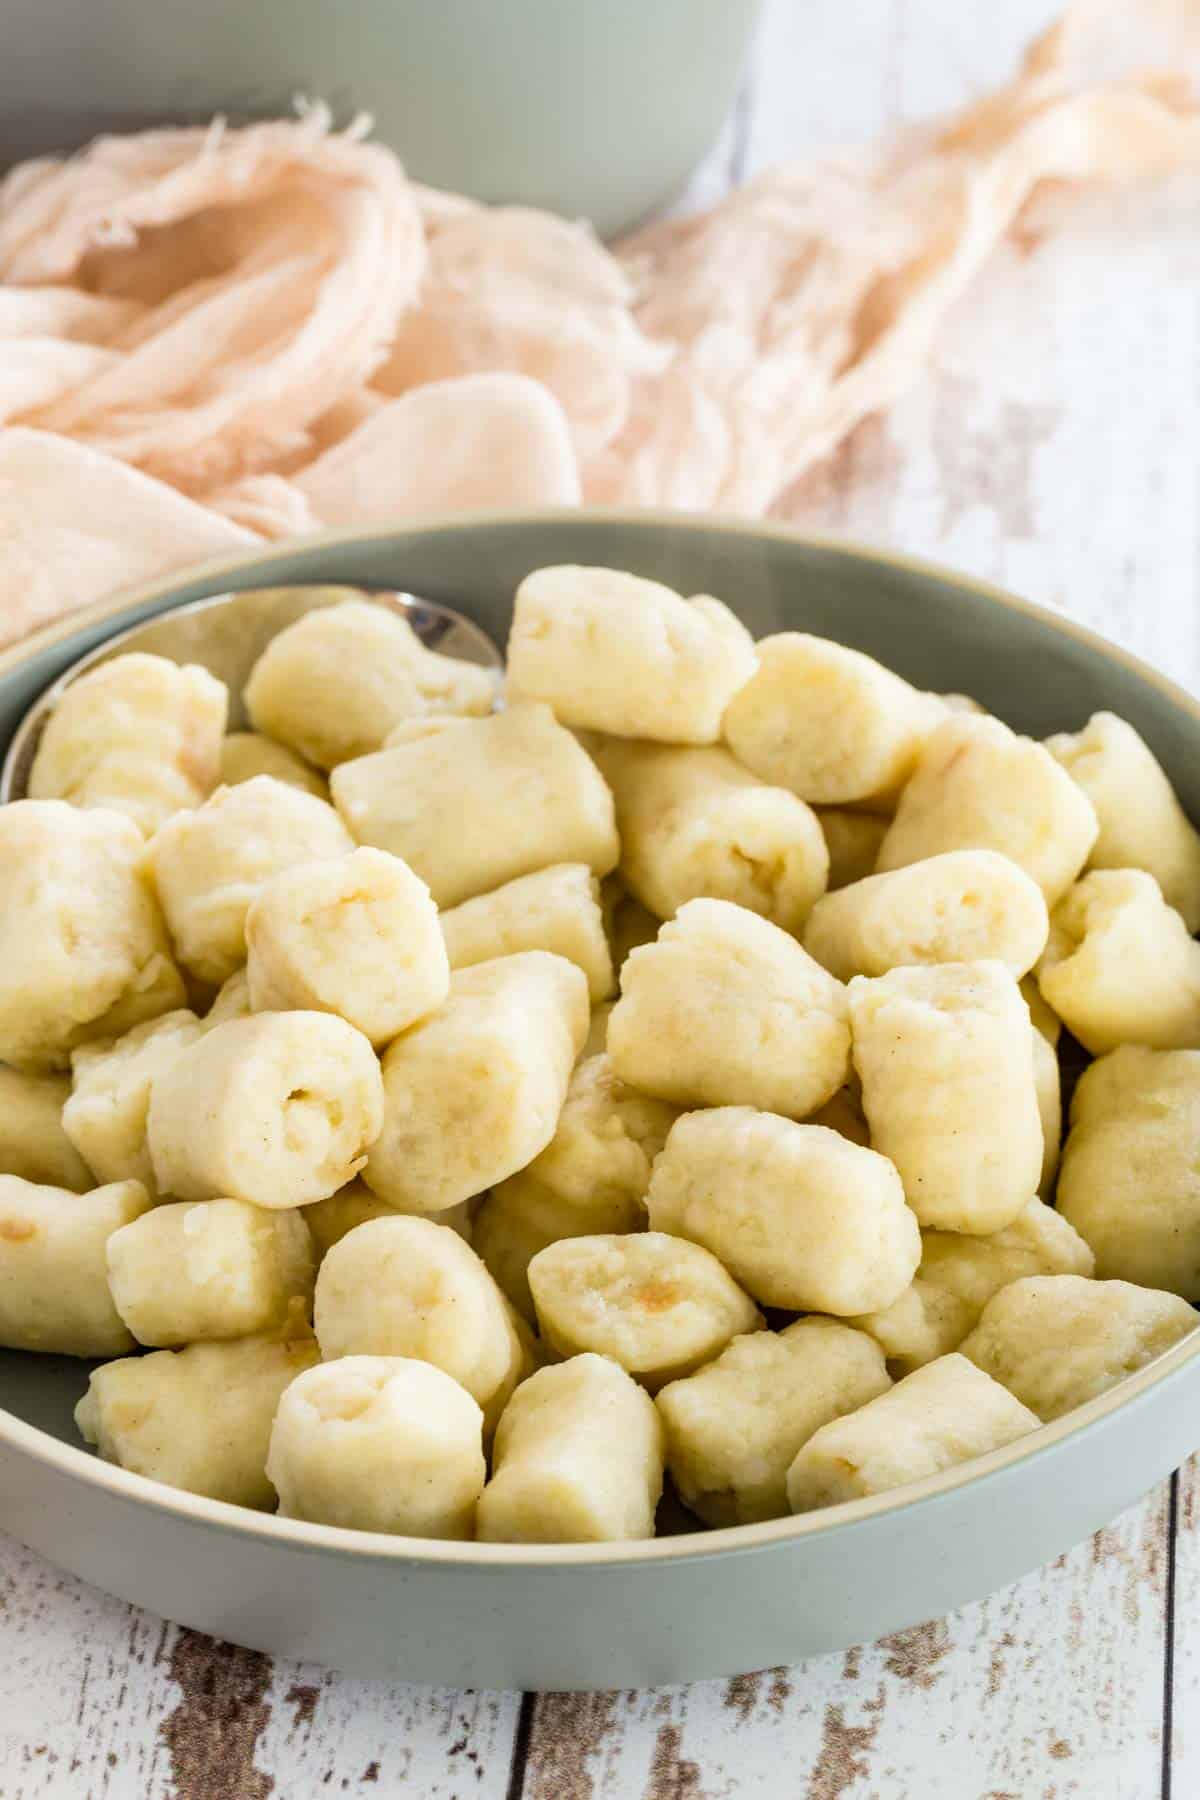 A serving dish full of cooked gluten-free gnocchi.